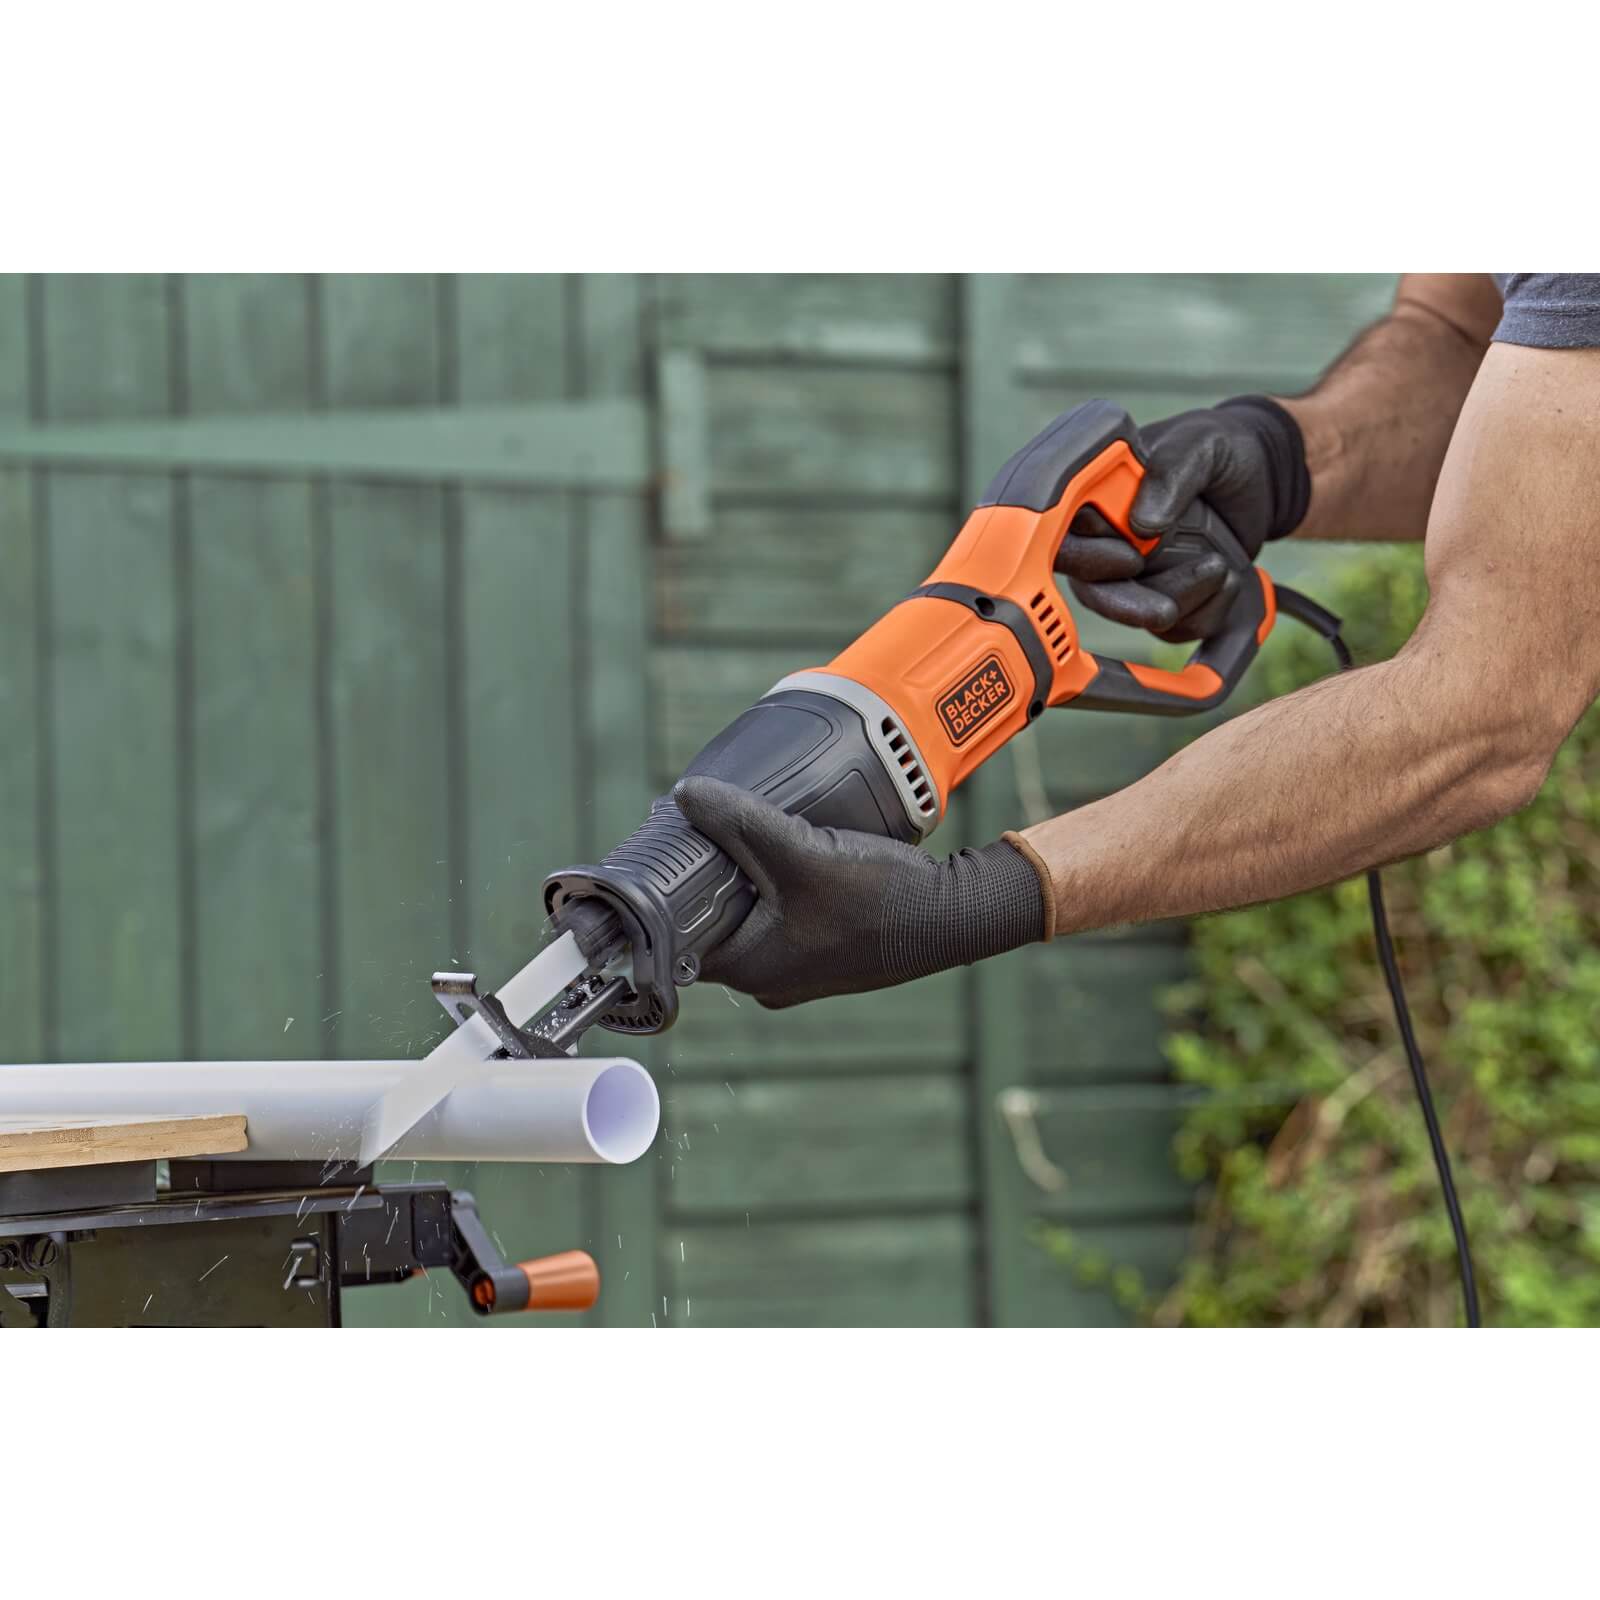 BLACK+DECKER 750W Corded Reciprocating Saw with Branch Holder and Blades (BES301-GB)